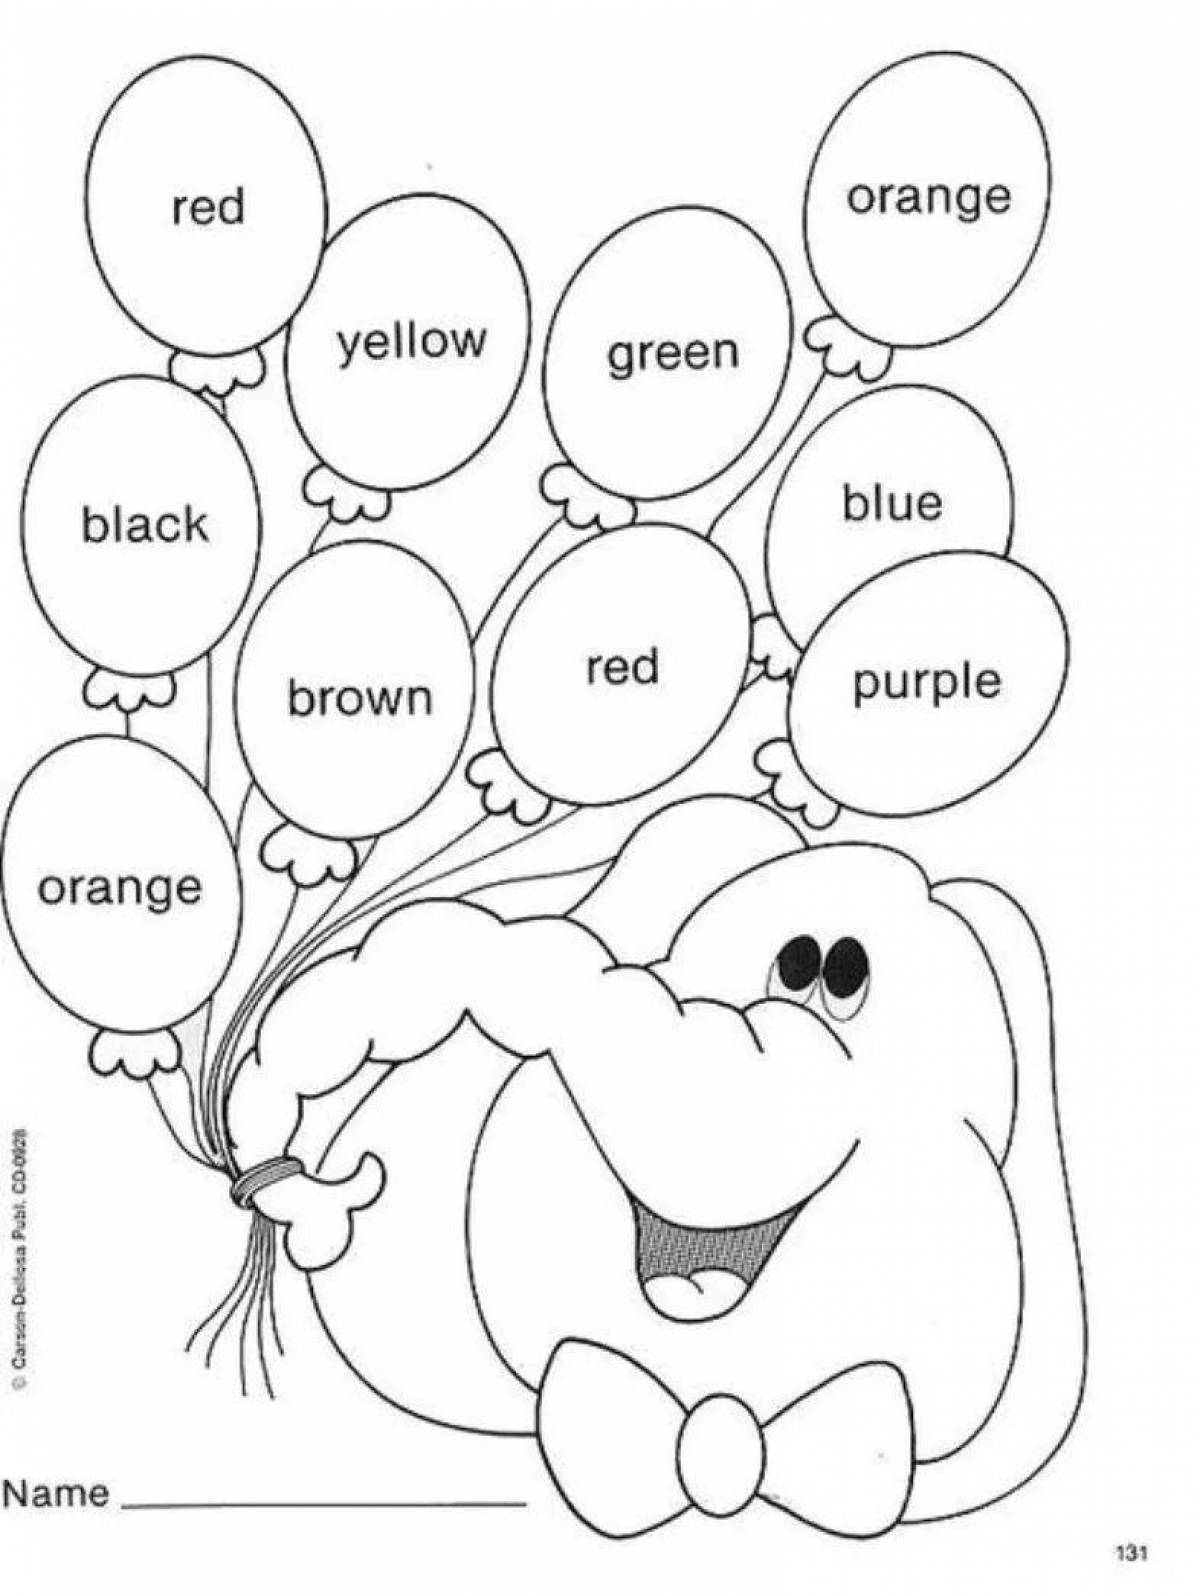 Colourful coloring for children